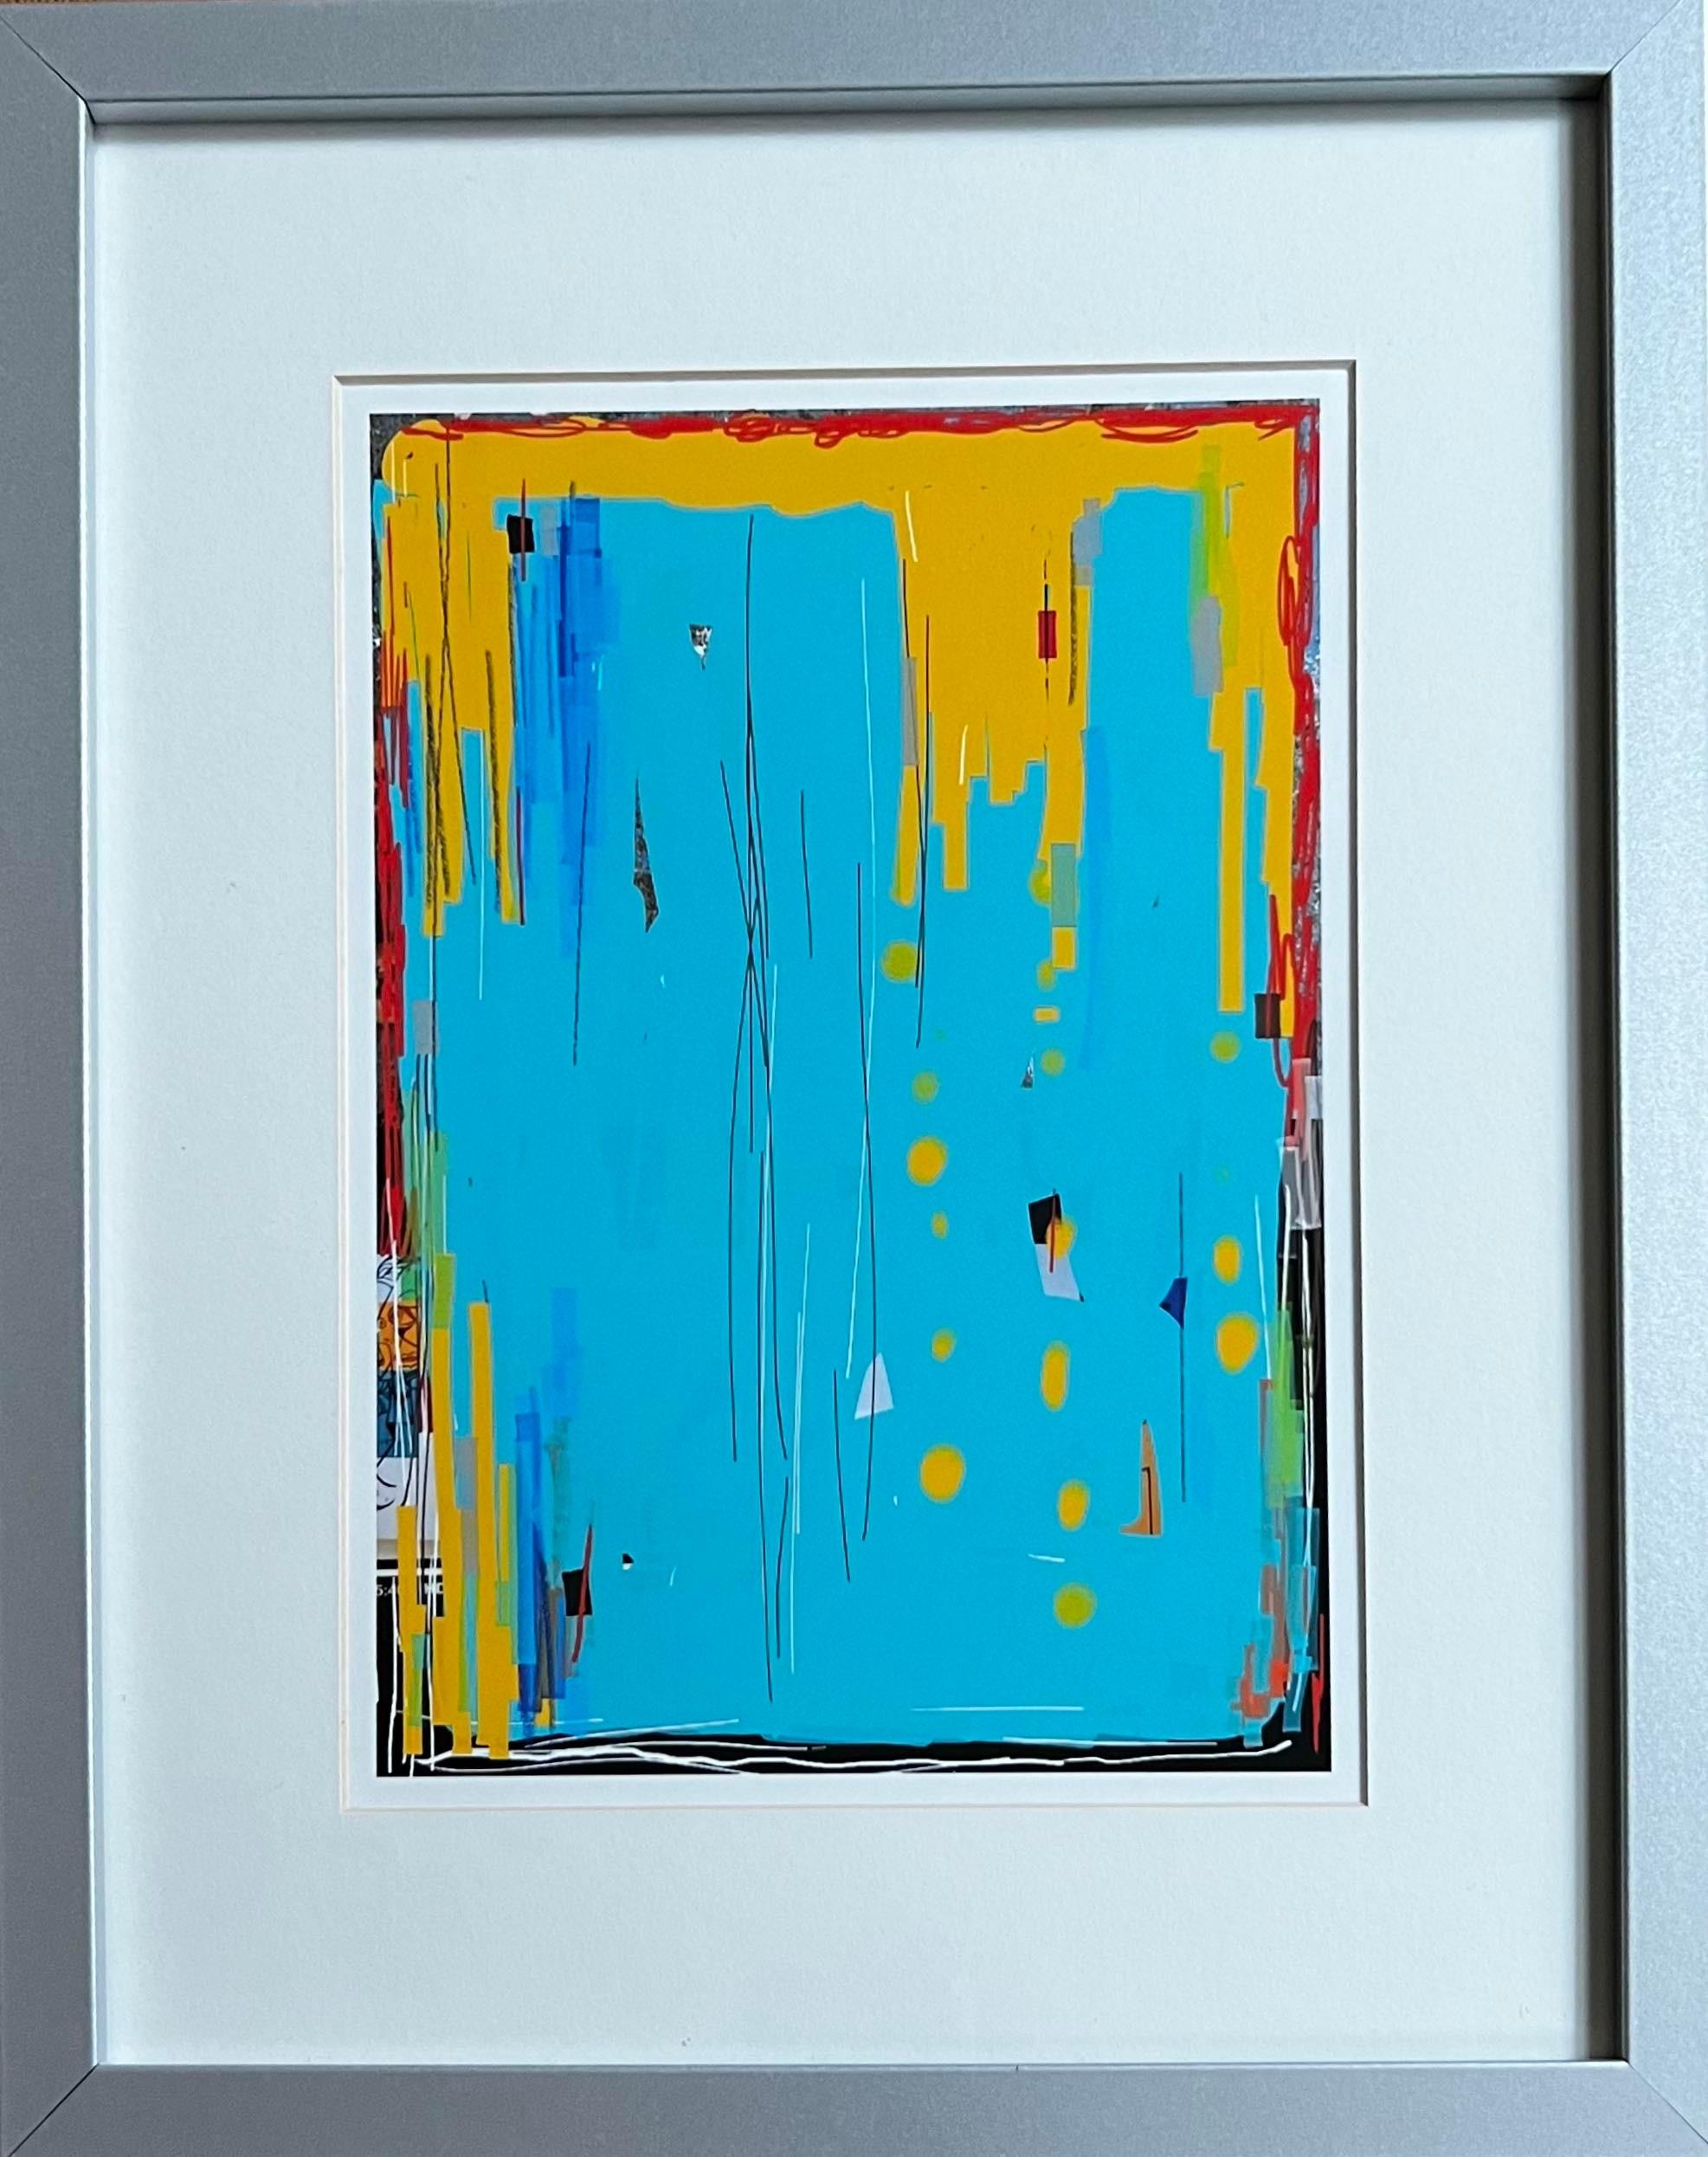 Digital Drawing as Framed Archival Inkjet Print -- Dream House - Blue Abstract Print by George Simmons